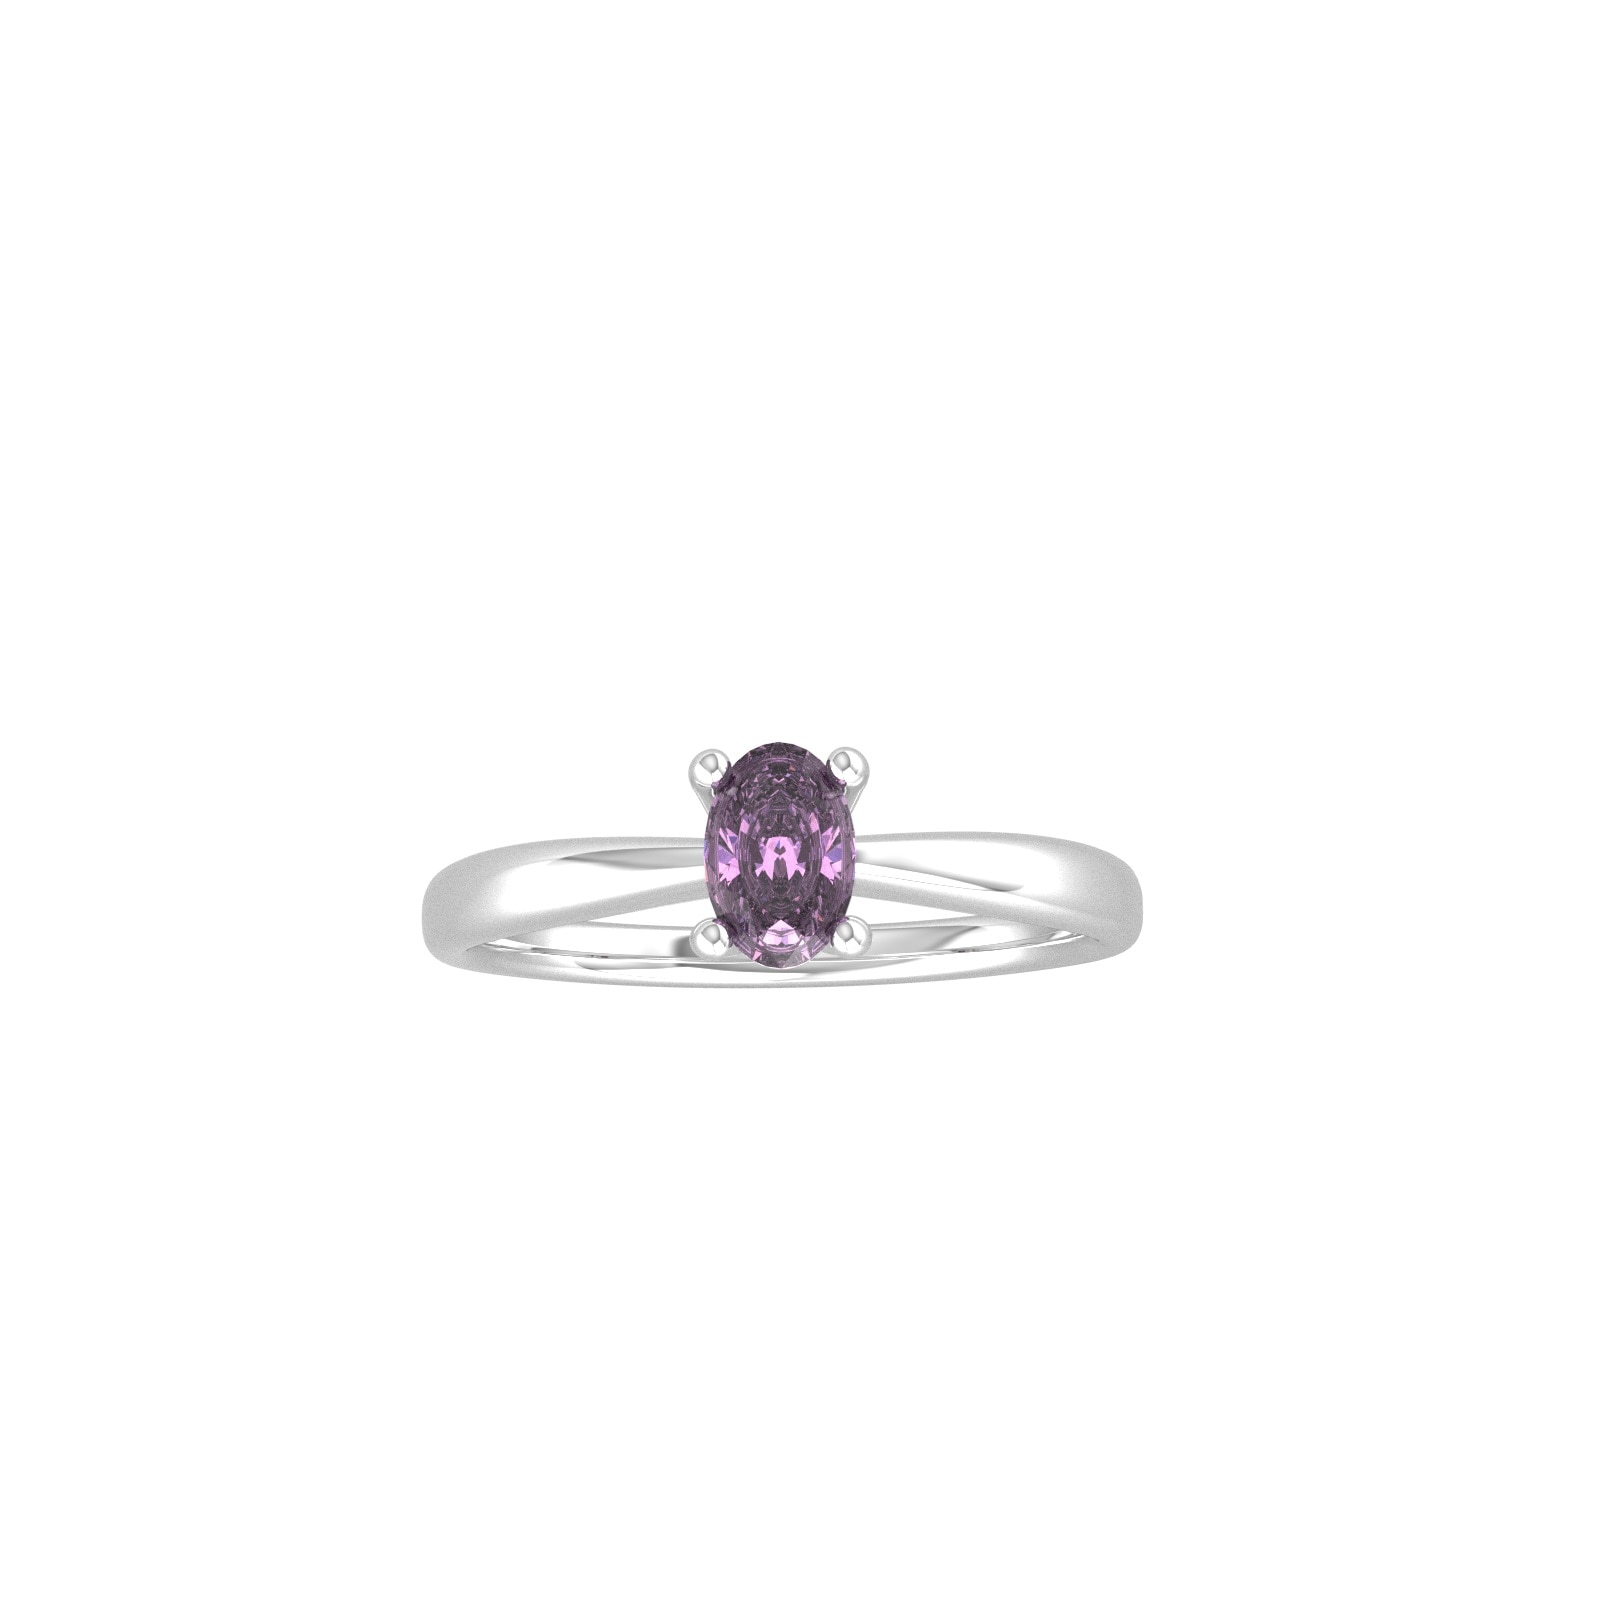 9ct White Gold 4 Claw Oval Amethyst Ring